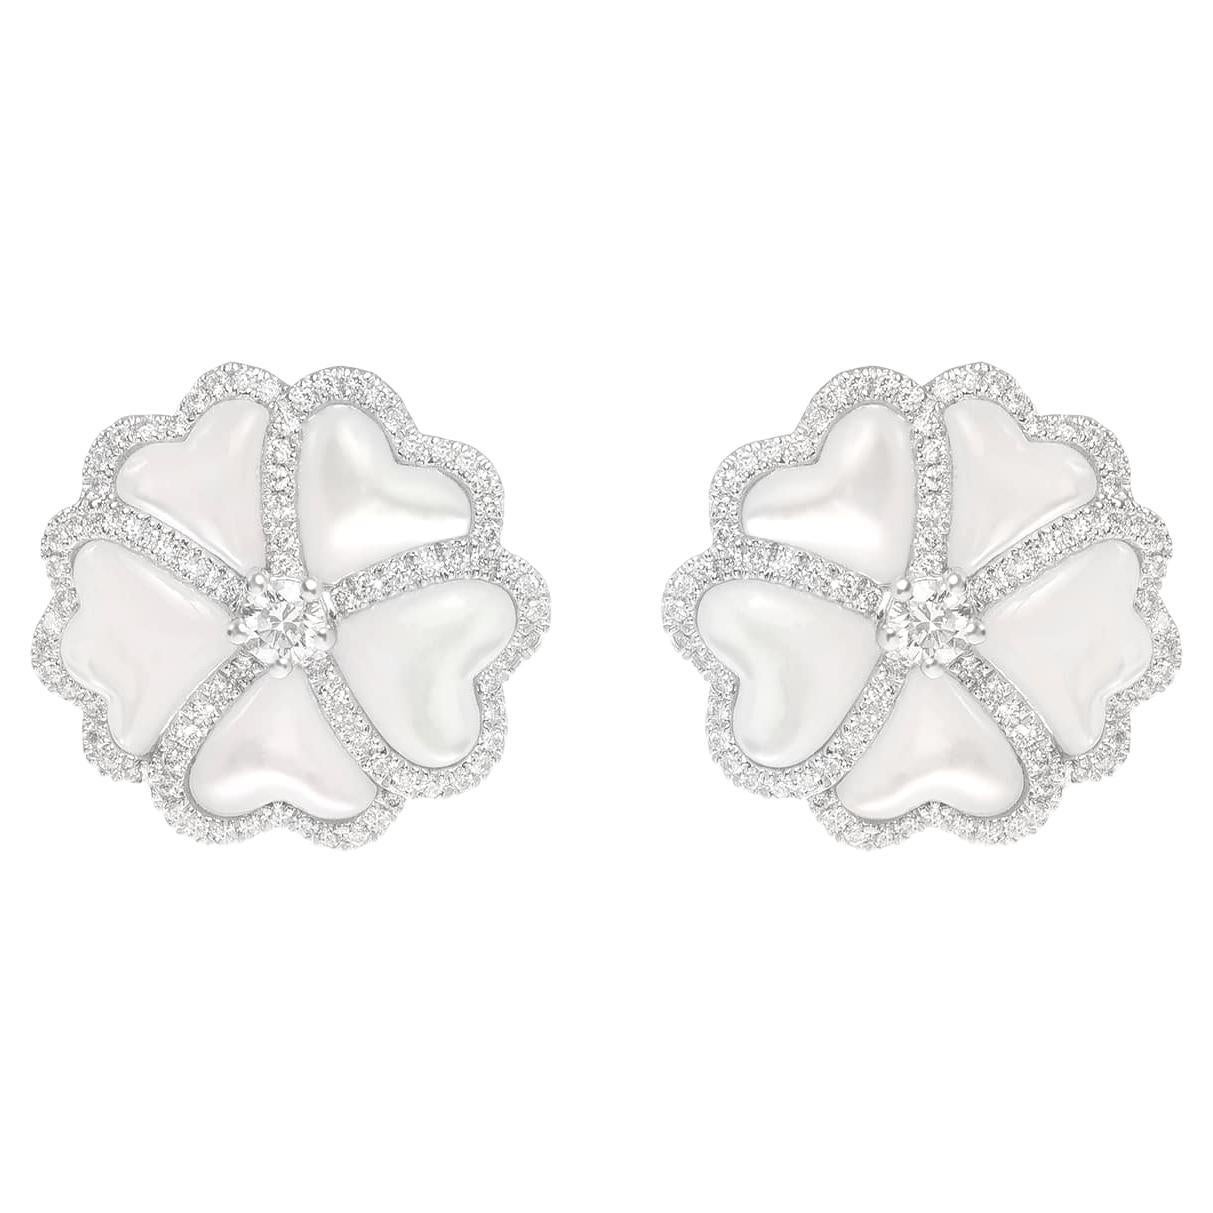 Bloom Diamond and White Mother-of-pearl Flower Stud Earrings in 18k White Gold